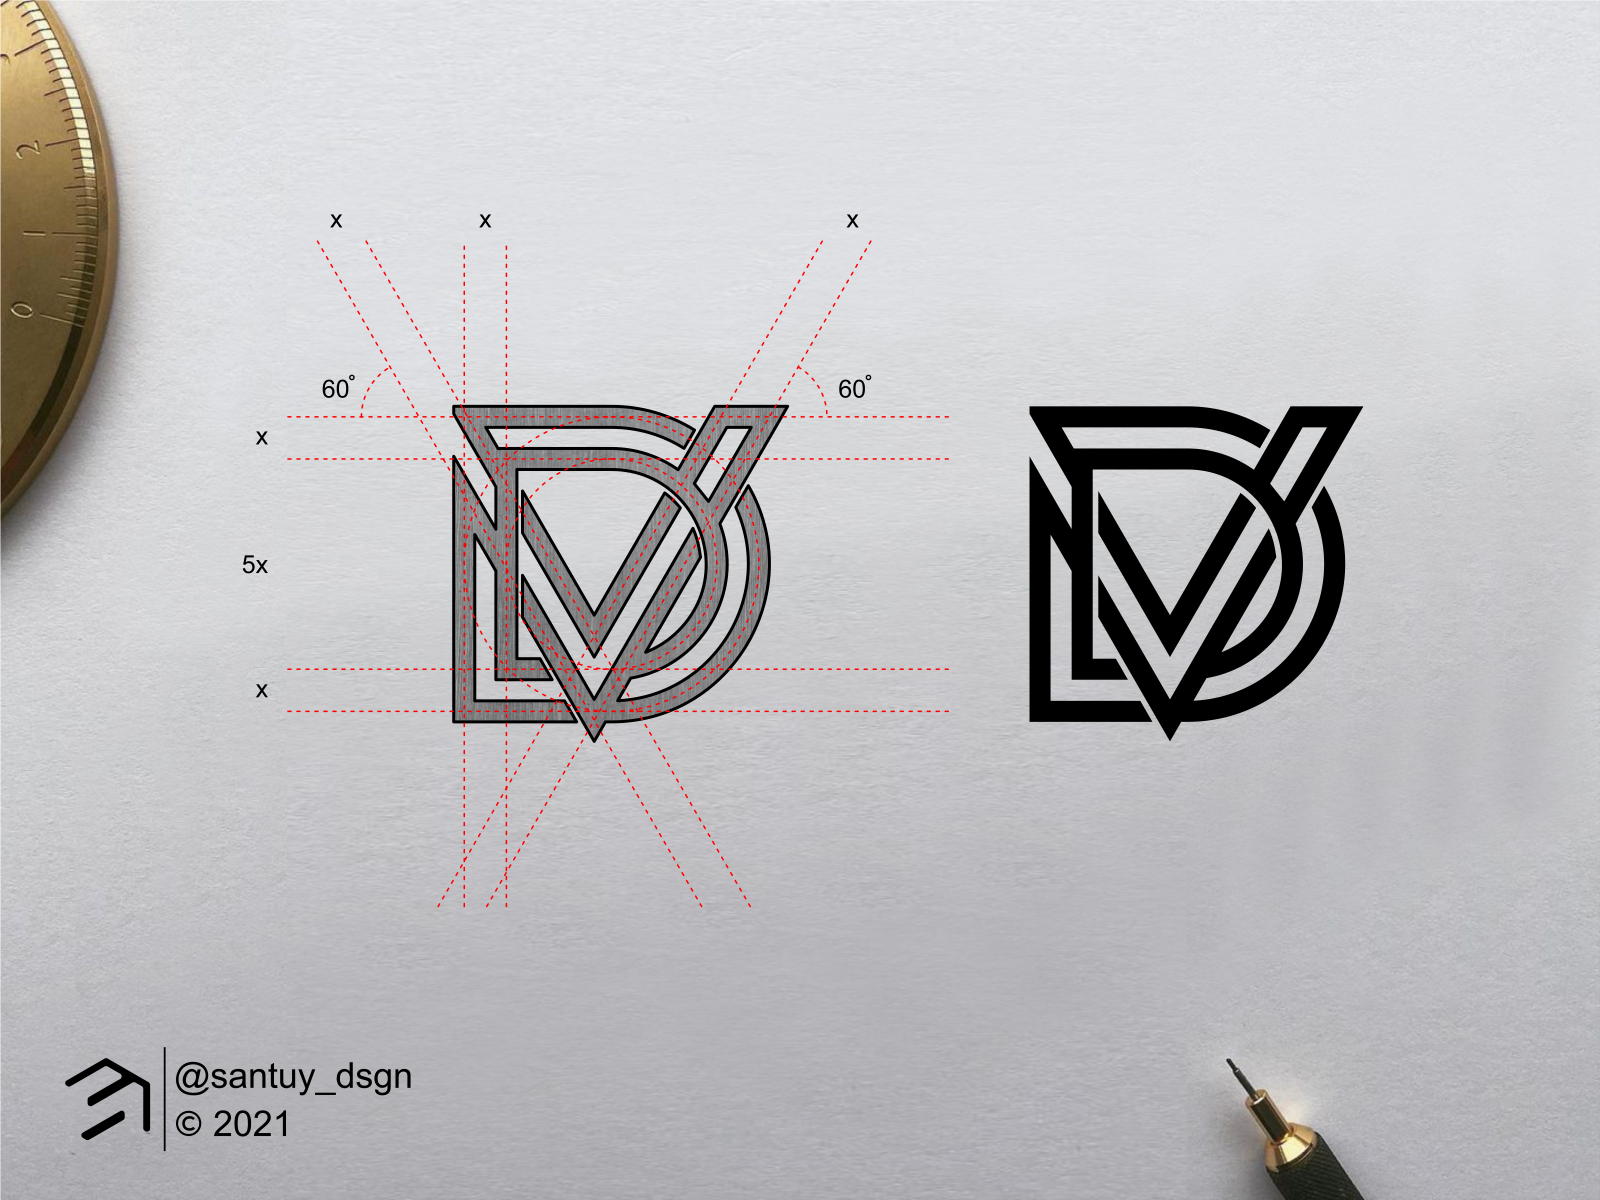 VD V D Letter Logo With Colorful Vivid Triangles Texture Design Vector  Illustration. Royalty Free SVG, Cliparts, Vectors, and Stock Illustration.  Image 76892168.